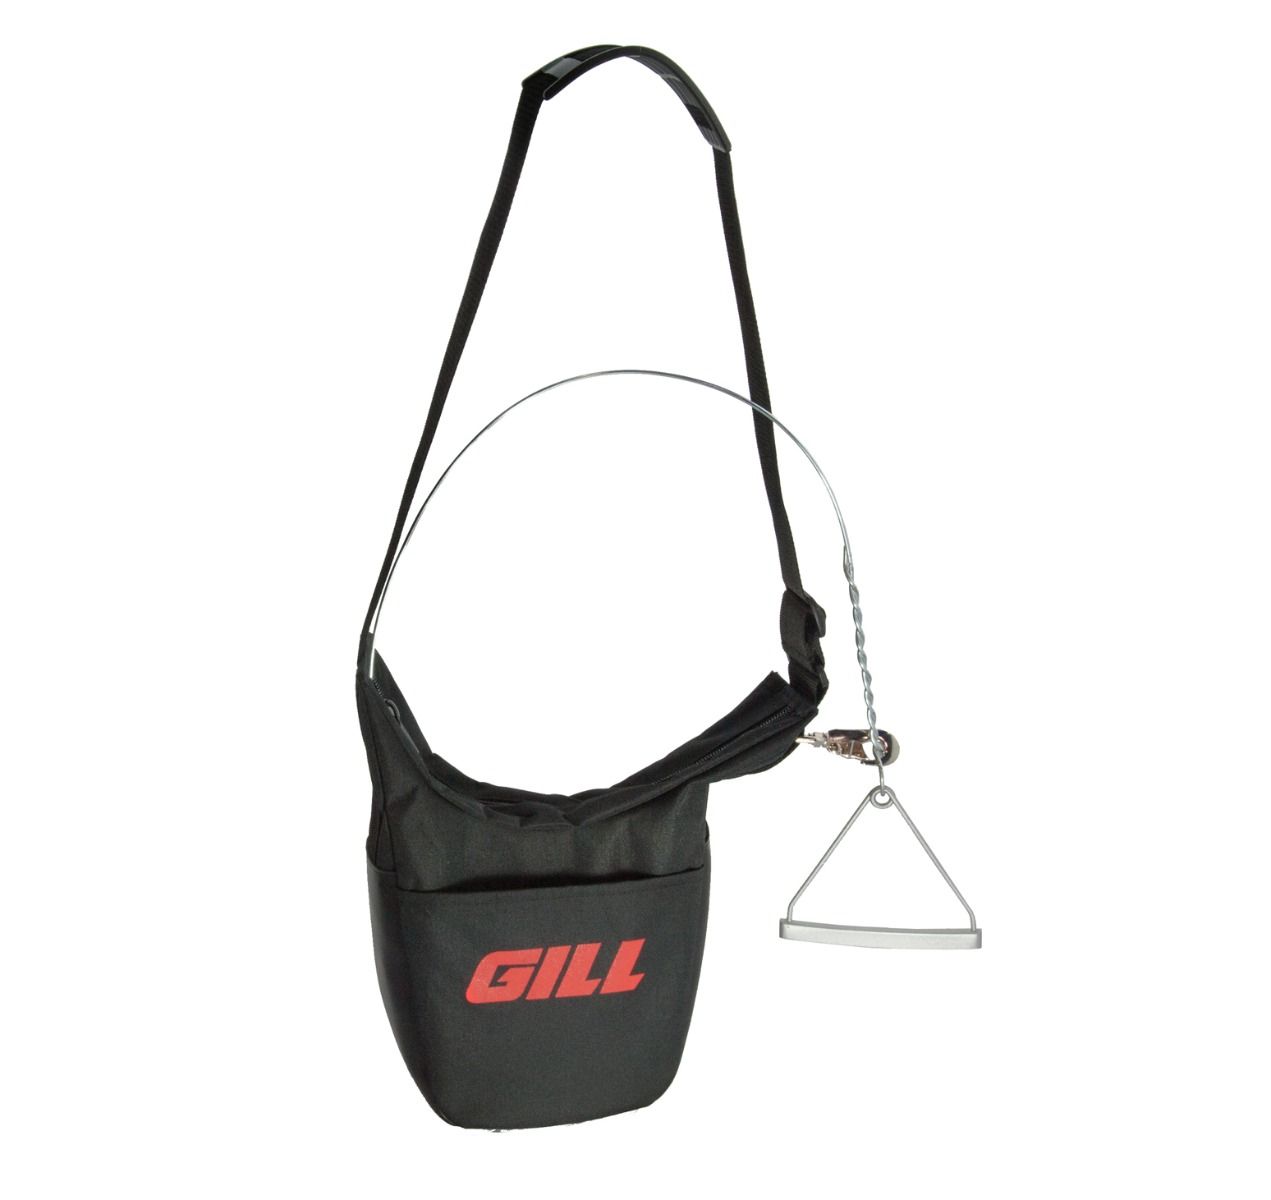 Gill Athletics Deluxe Universal Implement Carrier